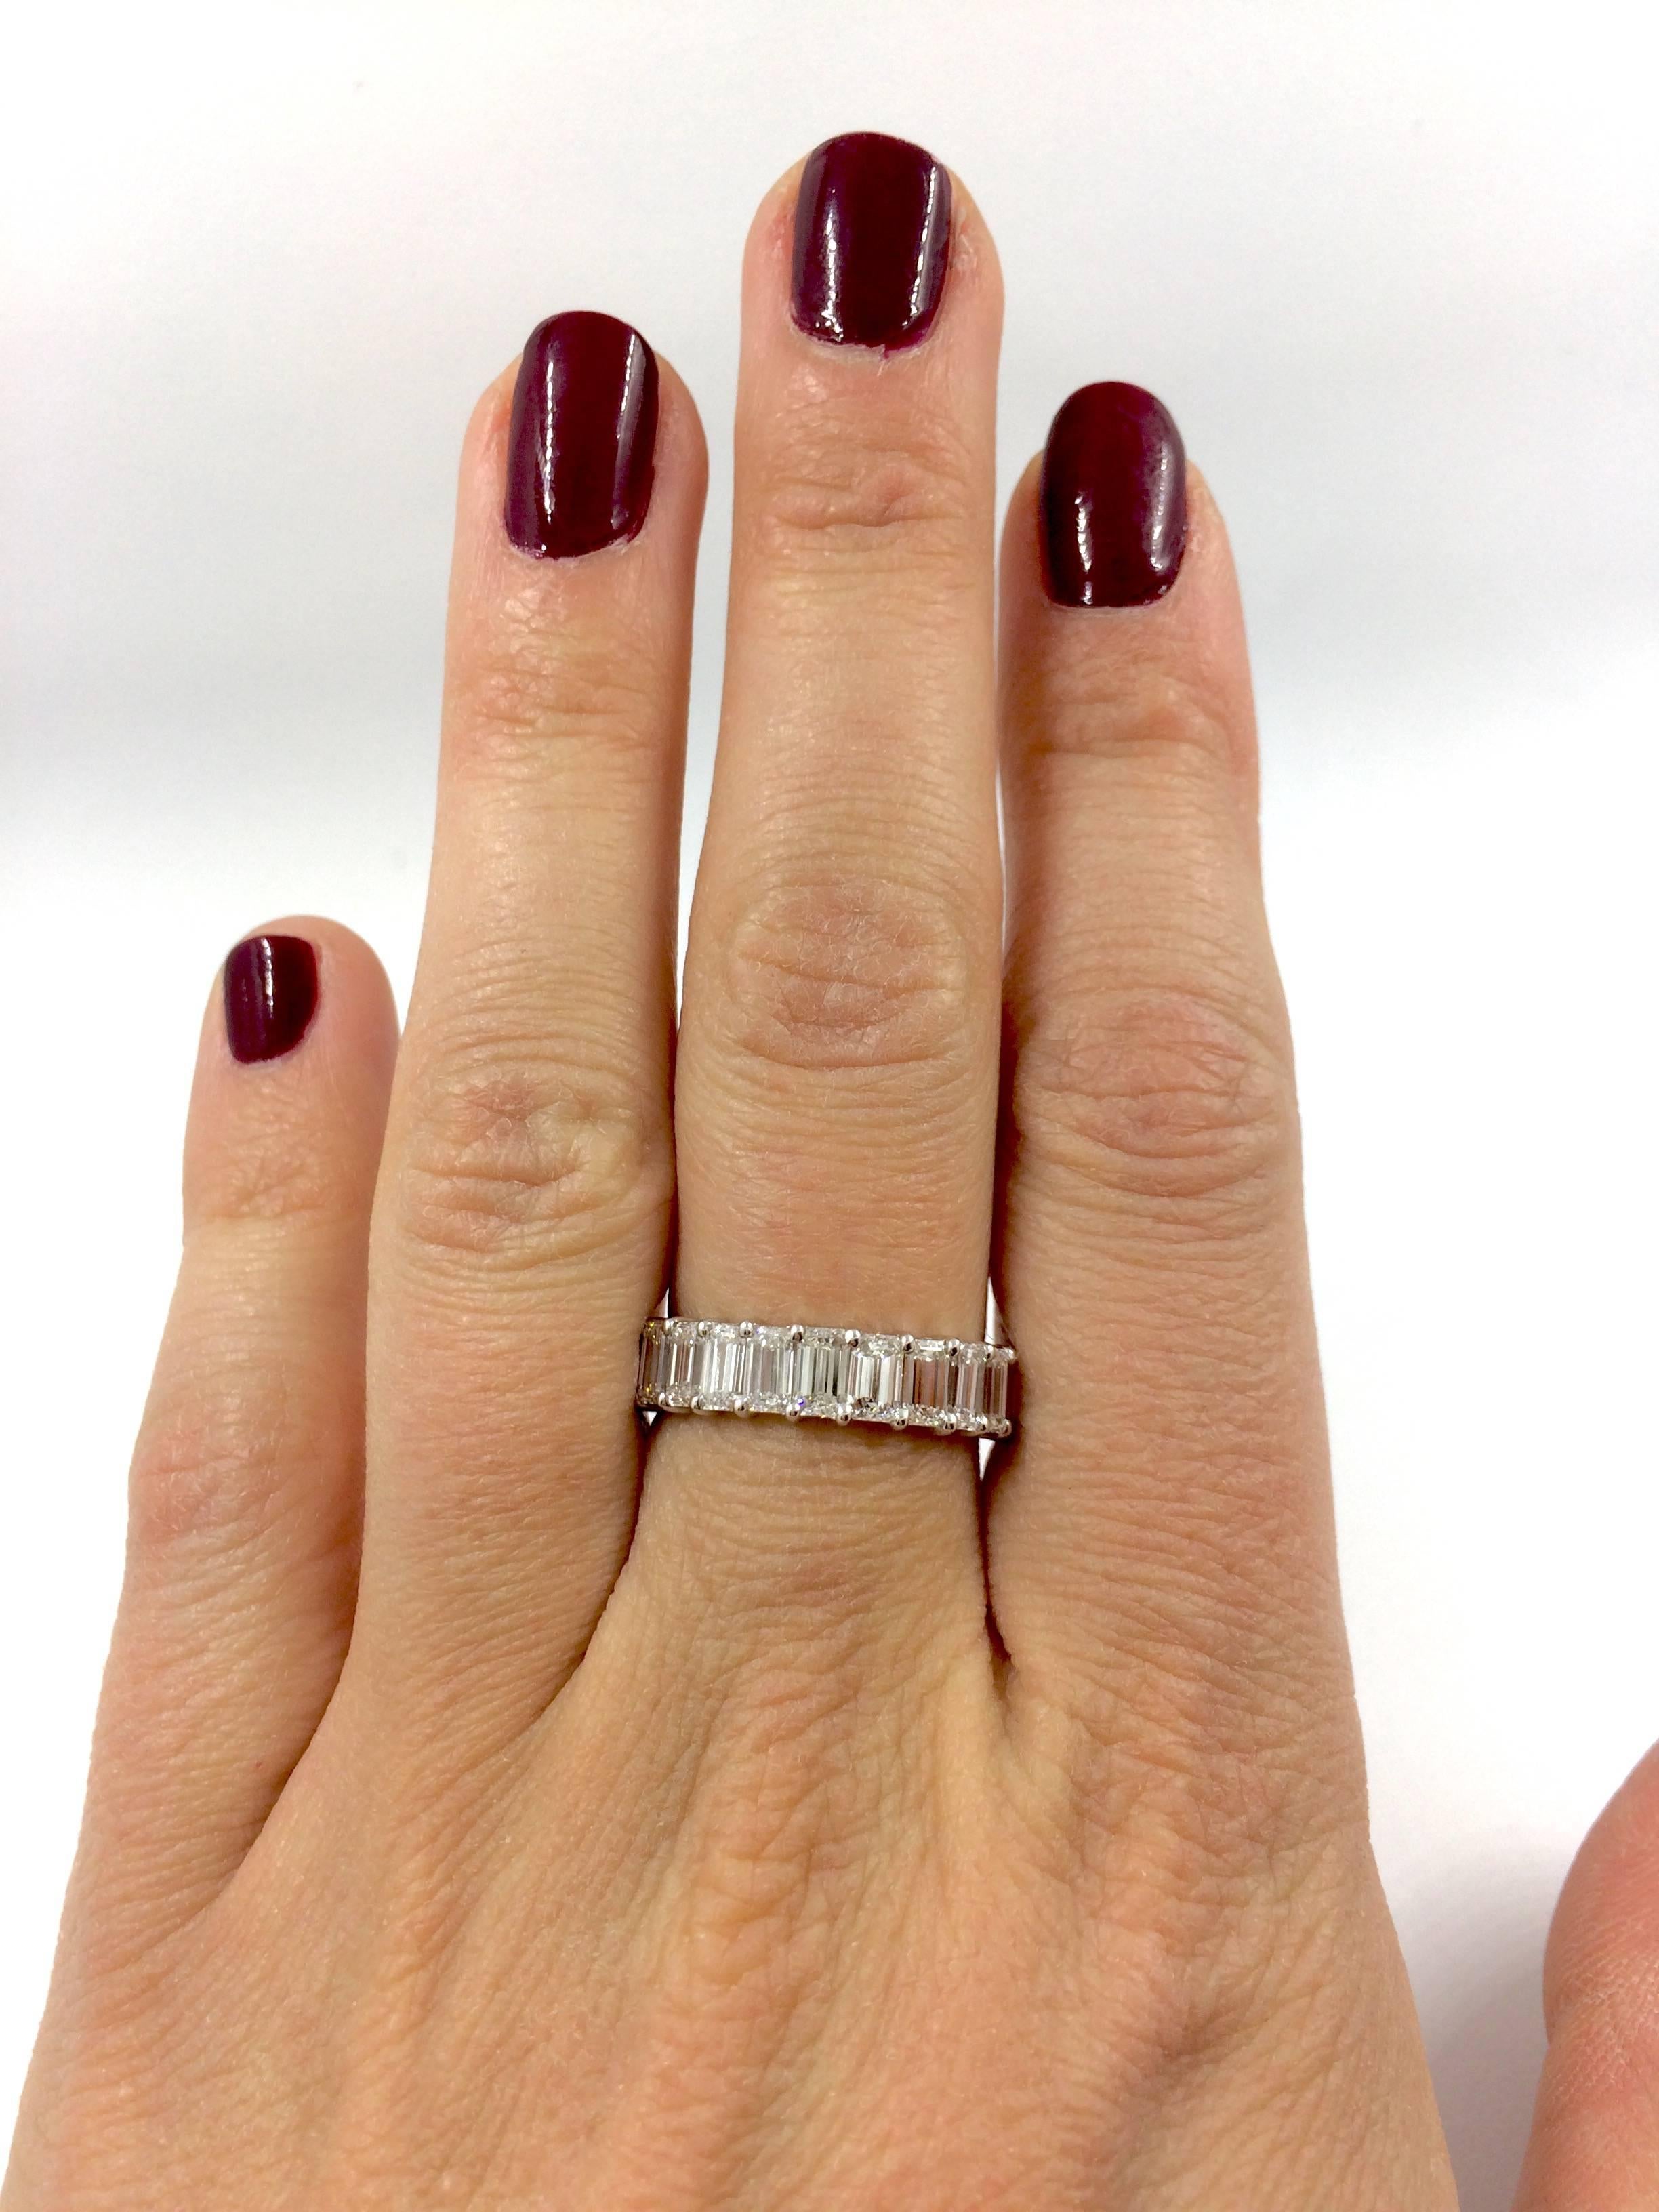 A white gold ring set with 12 emerald cut diamonds. The ring is entirely handmade.
Total diamonds Weight: 2.44 carat
Diamonds Quality: E-F/VVS
Net Weight: 5.45 grams
Finger Size: 6.5 can be sized